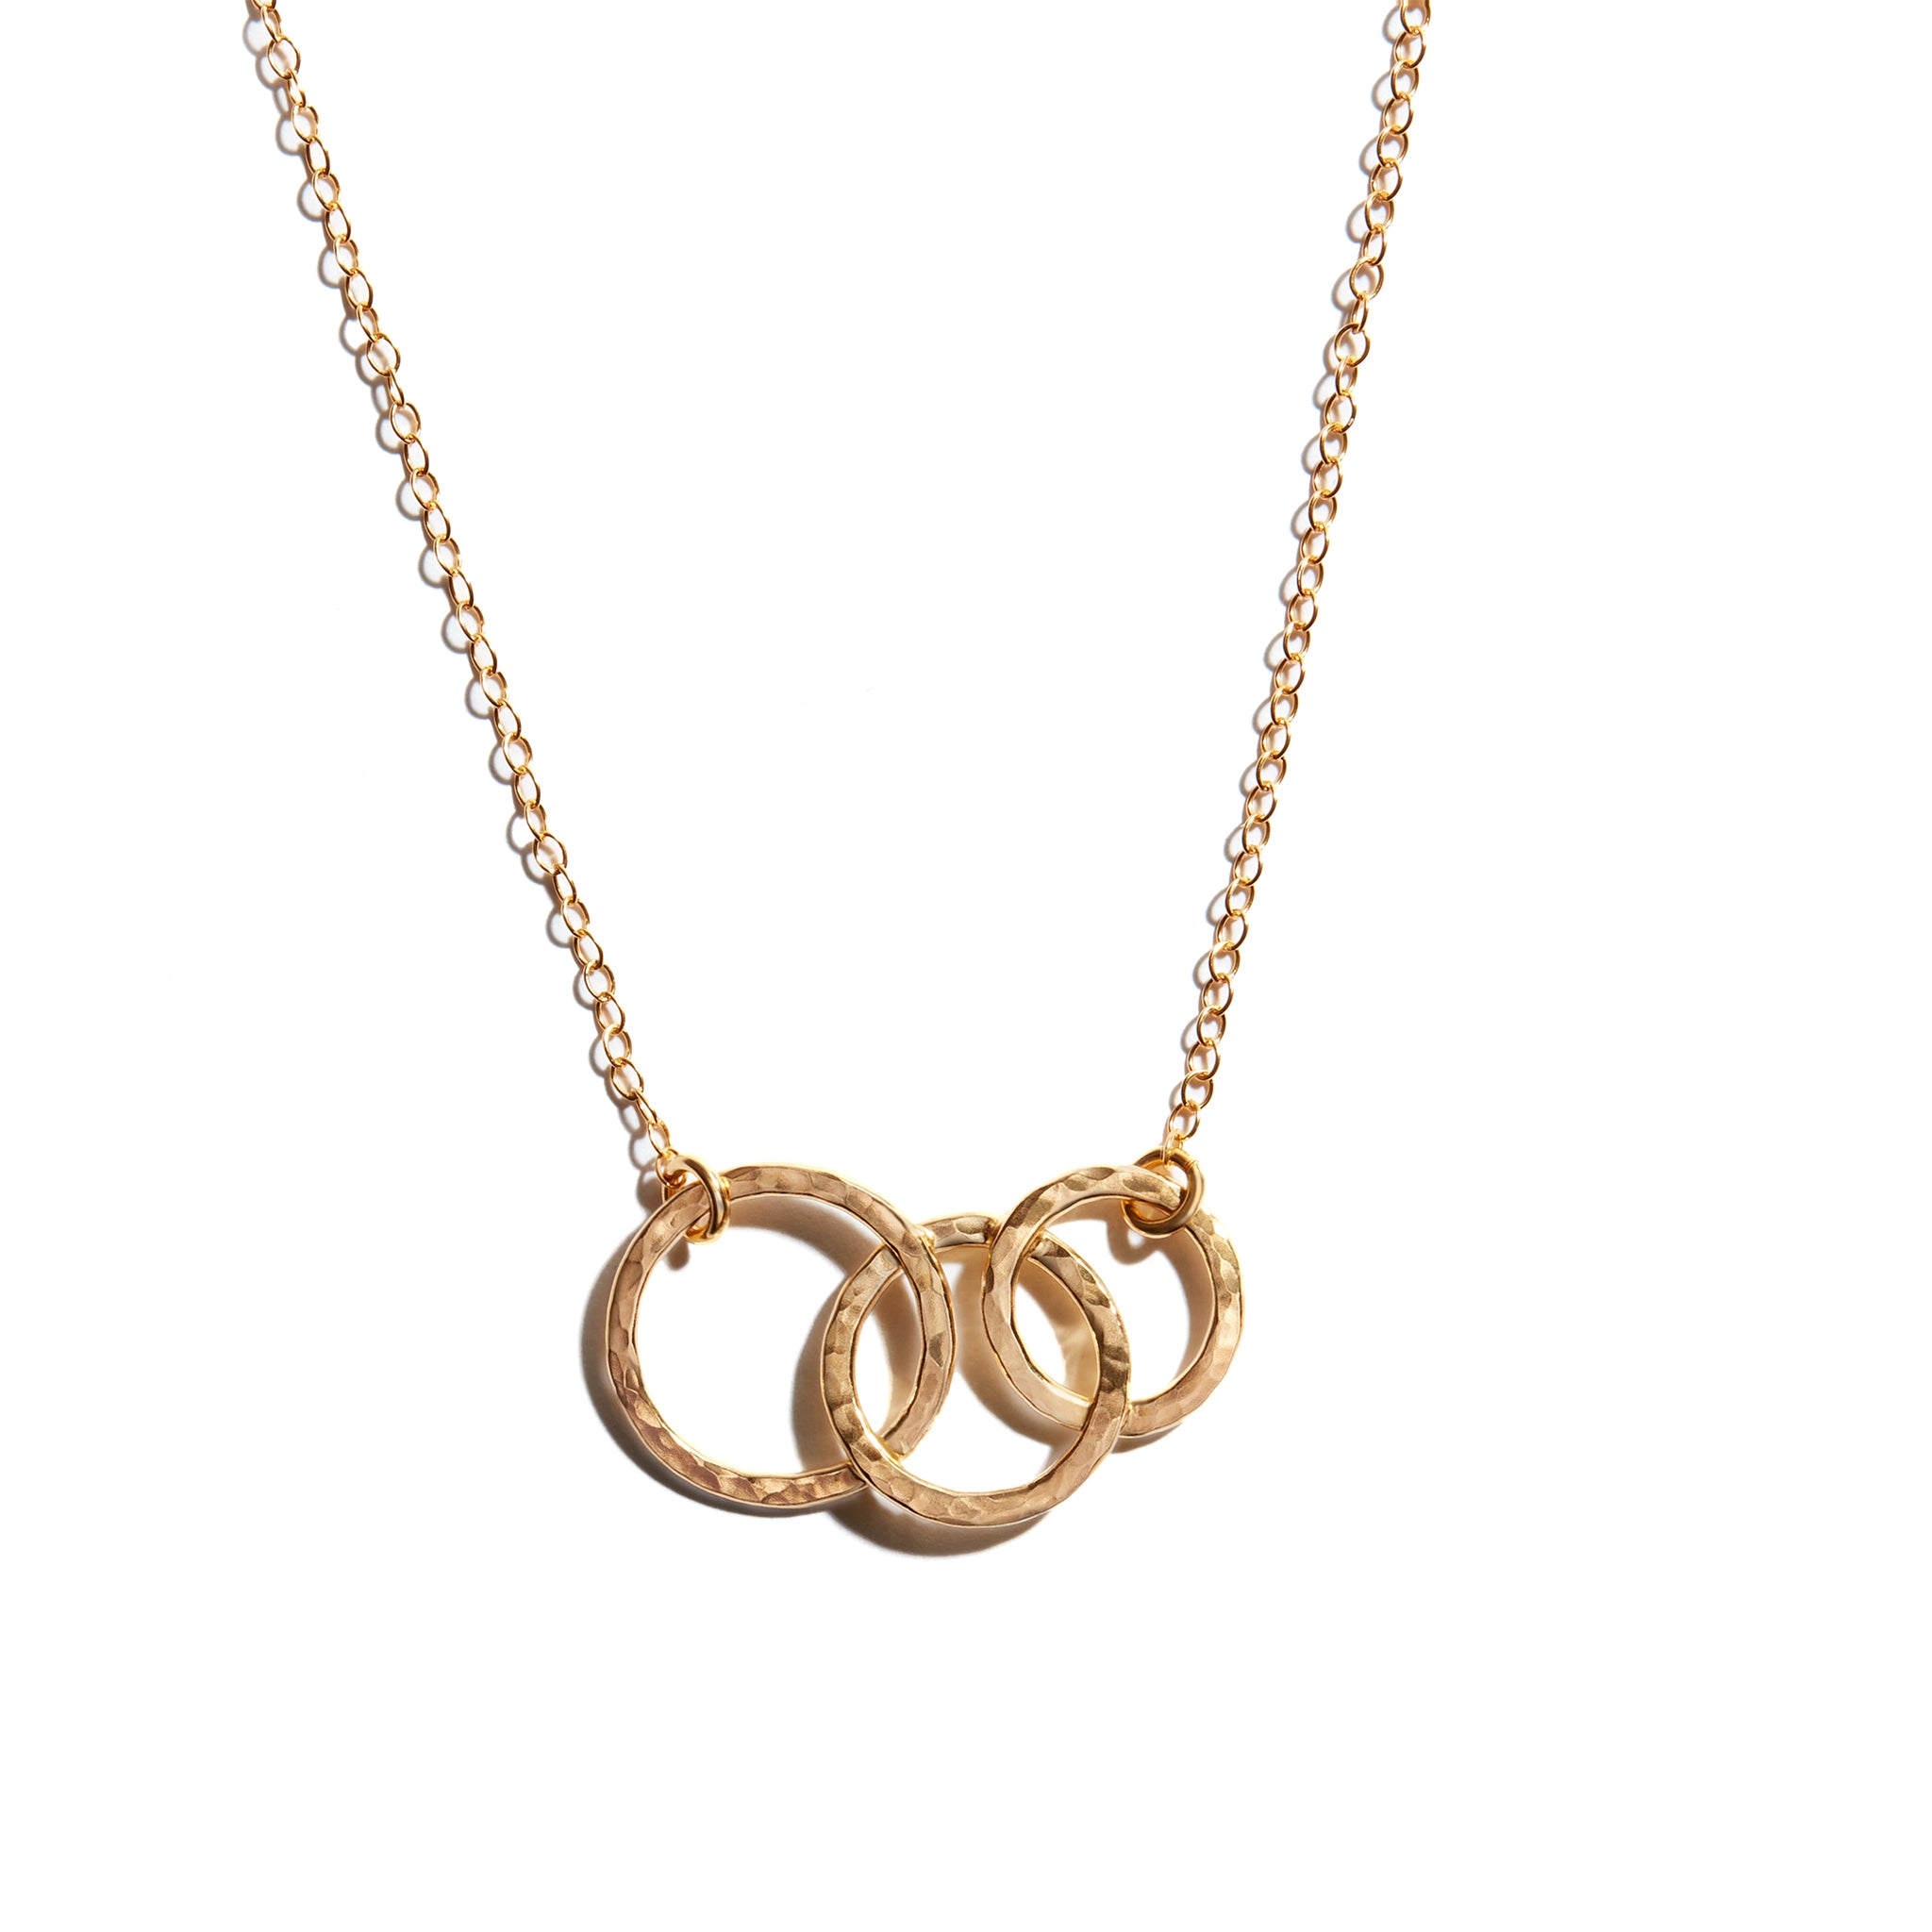 Close-up photo of triple circle necklace crafted from 14 carat gold fill. Perfect for adding elegance to any outfit.